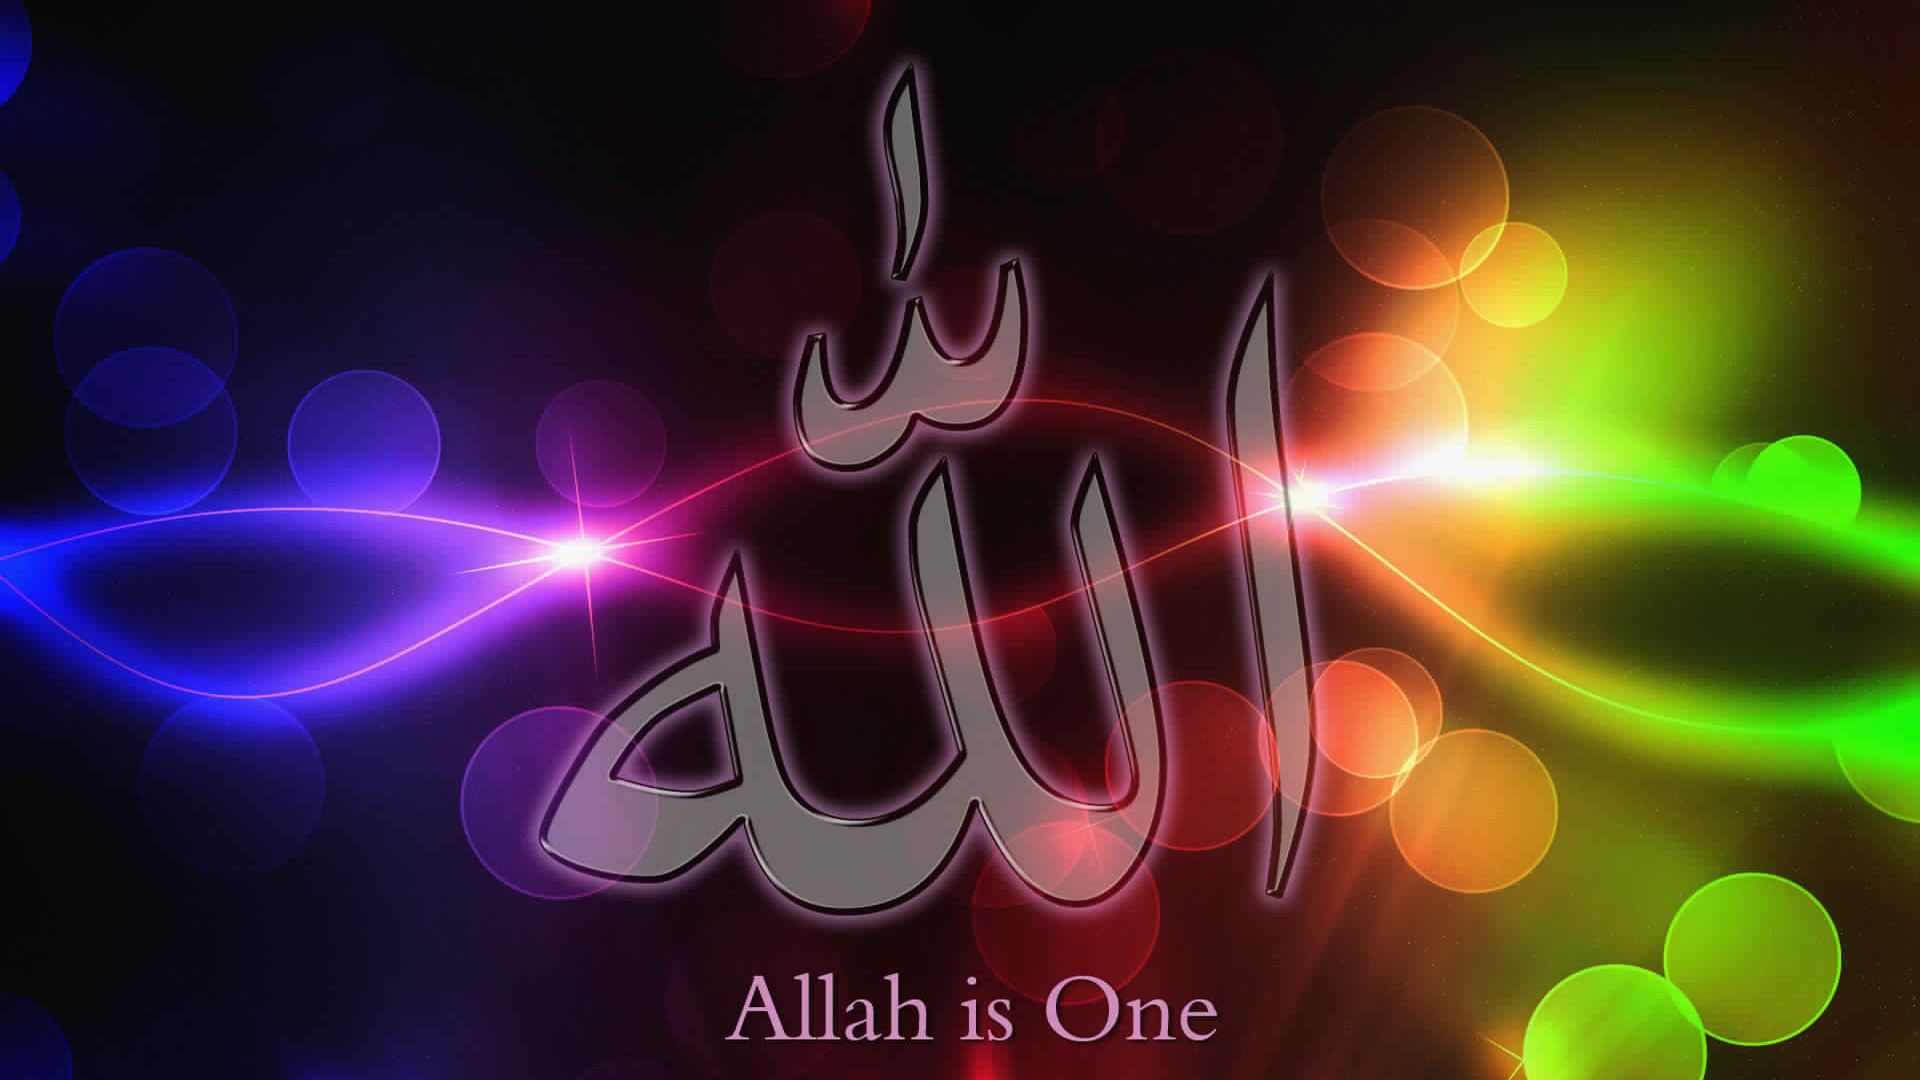 Islamic Hd Wallpapers For Mobile - God HD Wallpapers